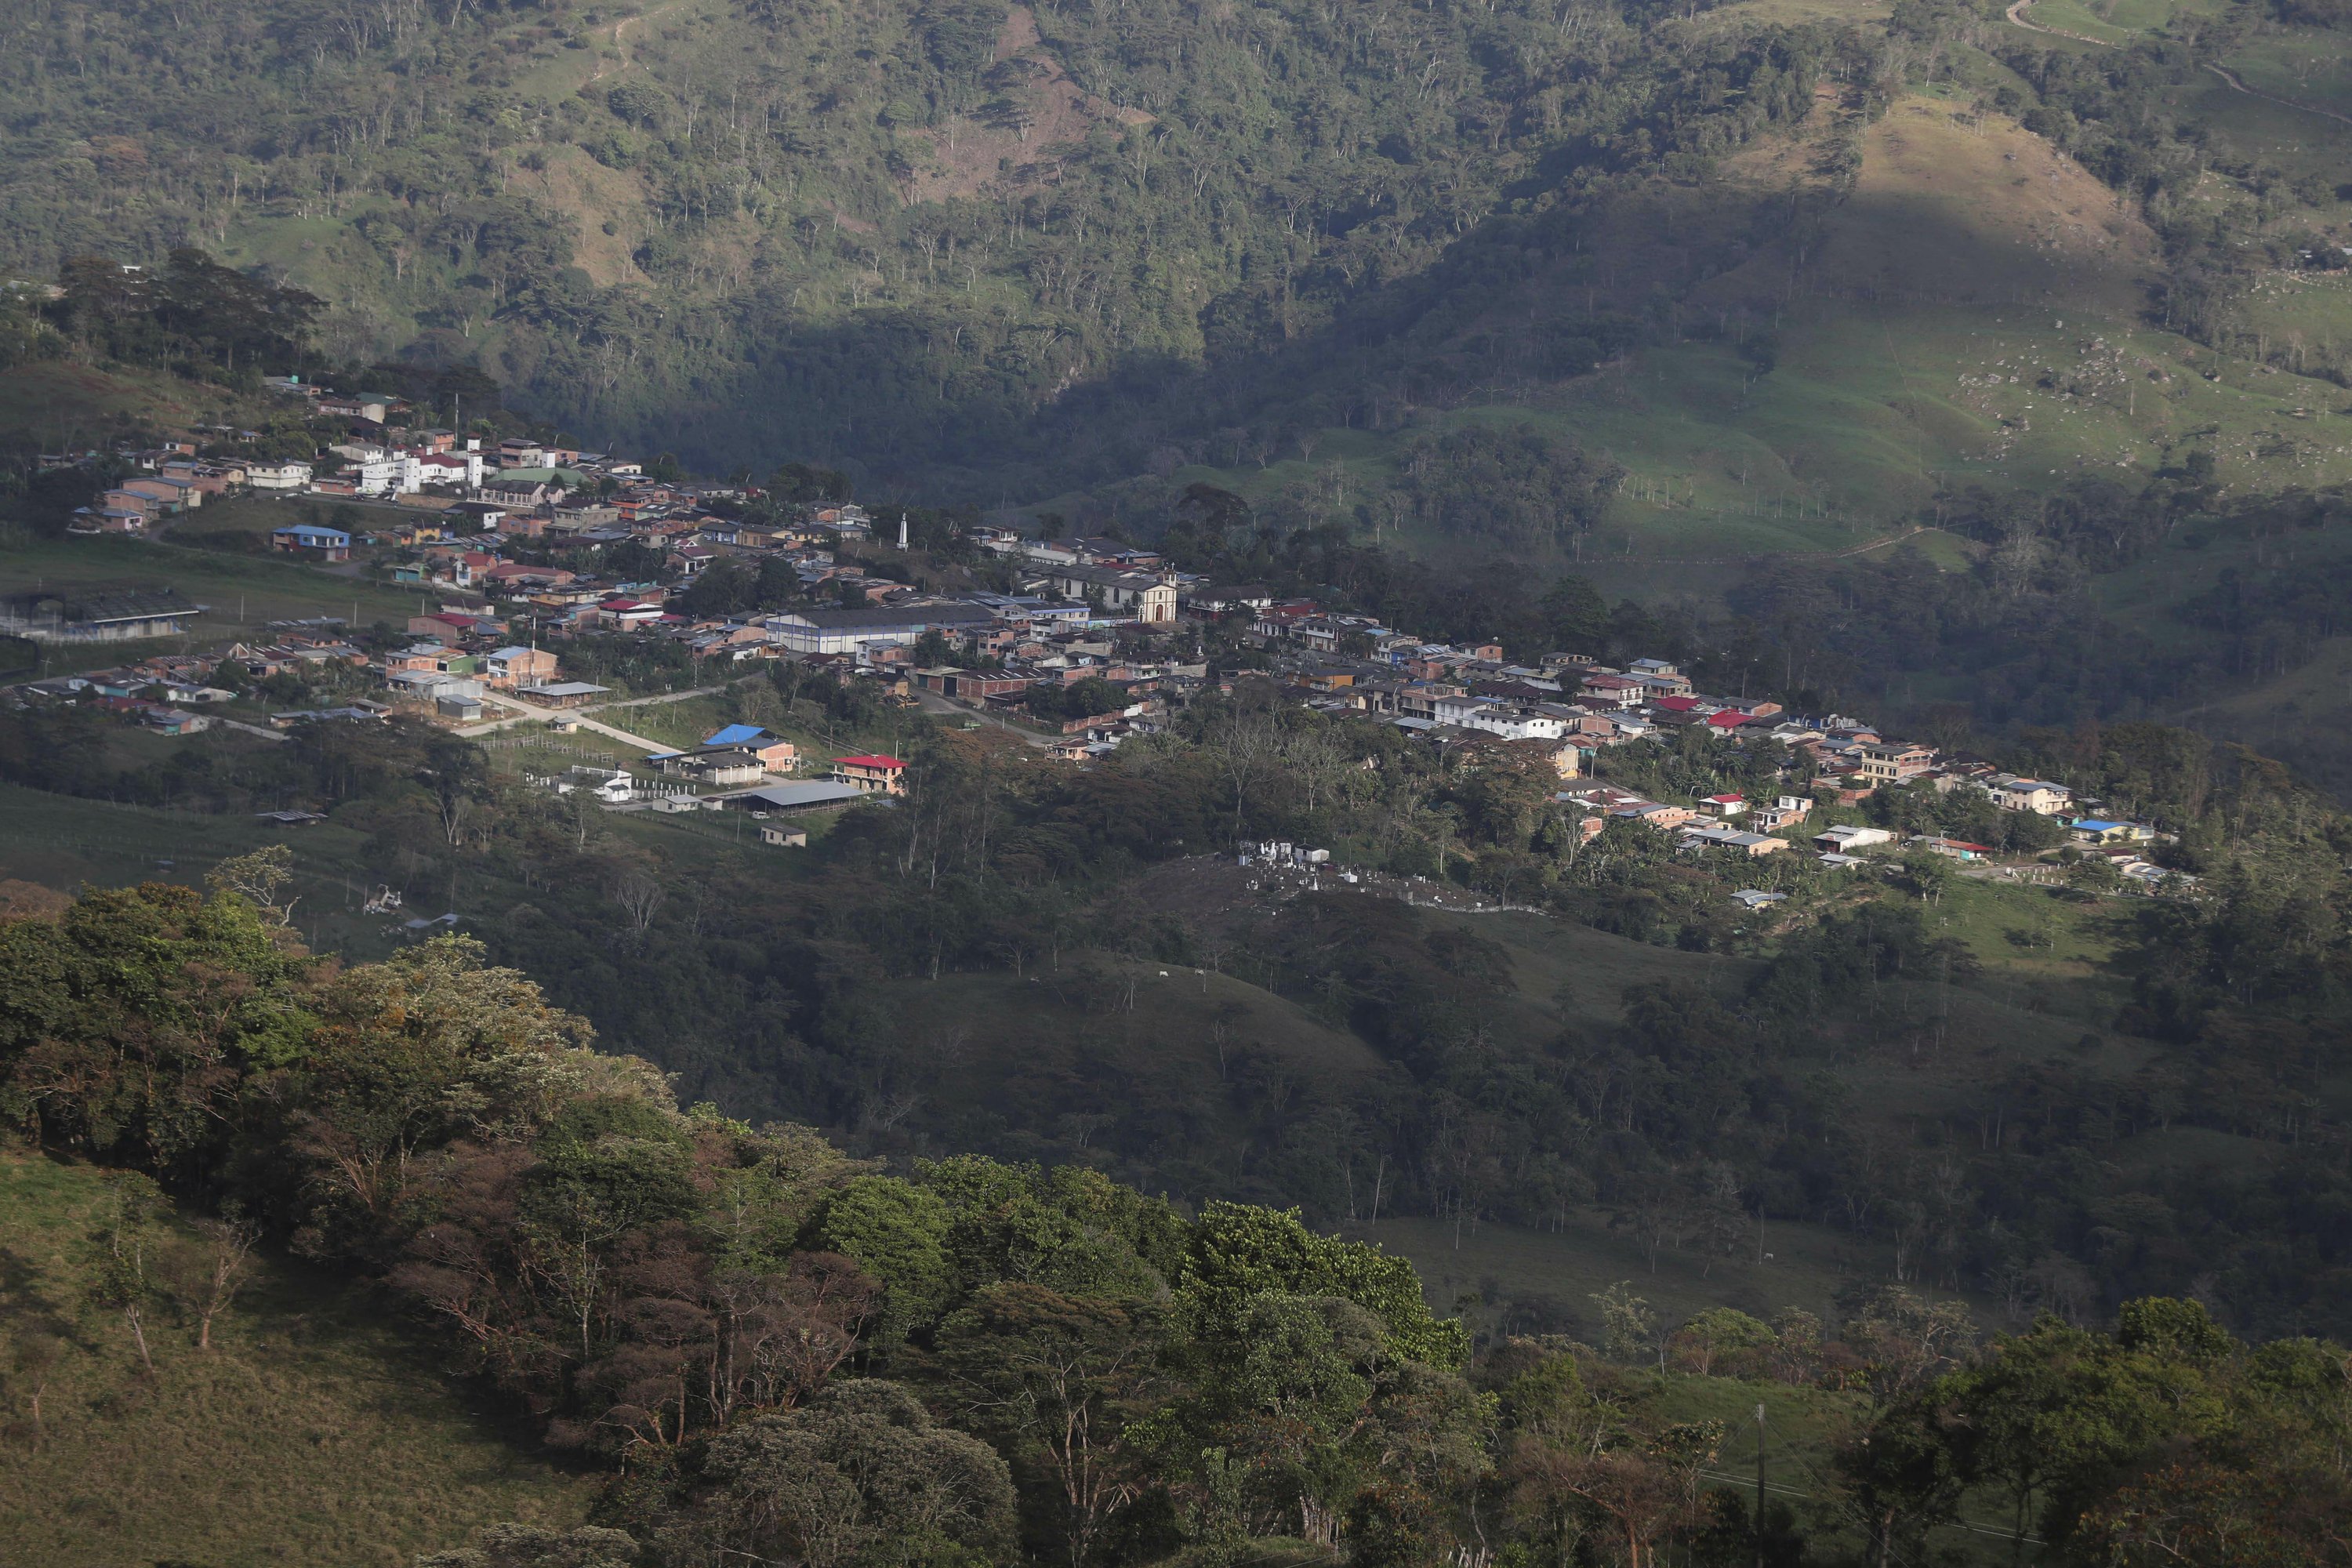 The Colombian city uses discipline and speakers to stay virus-free